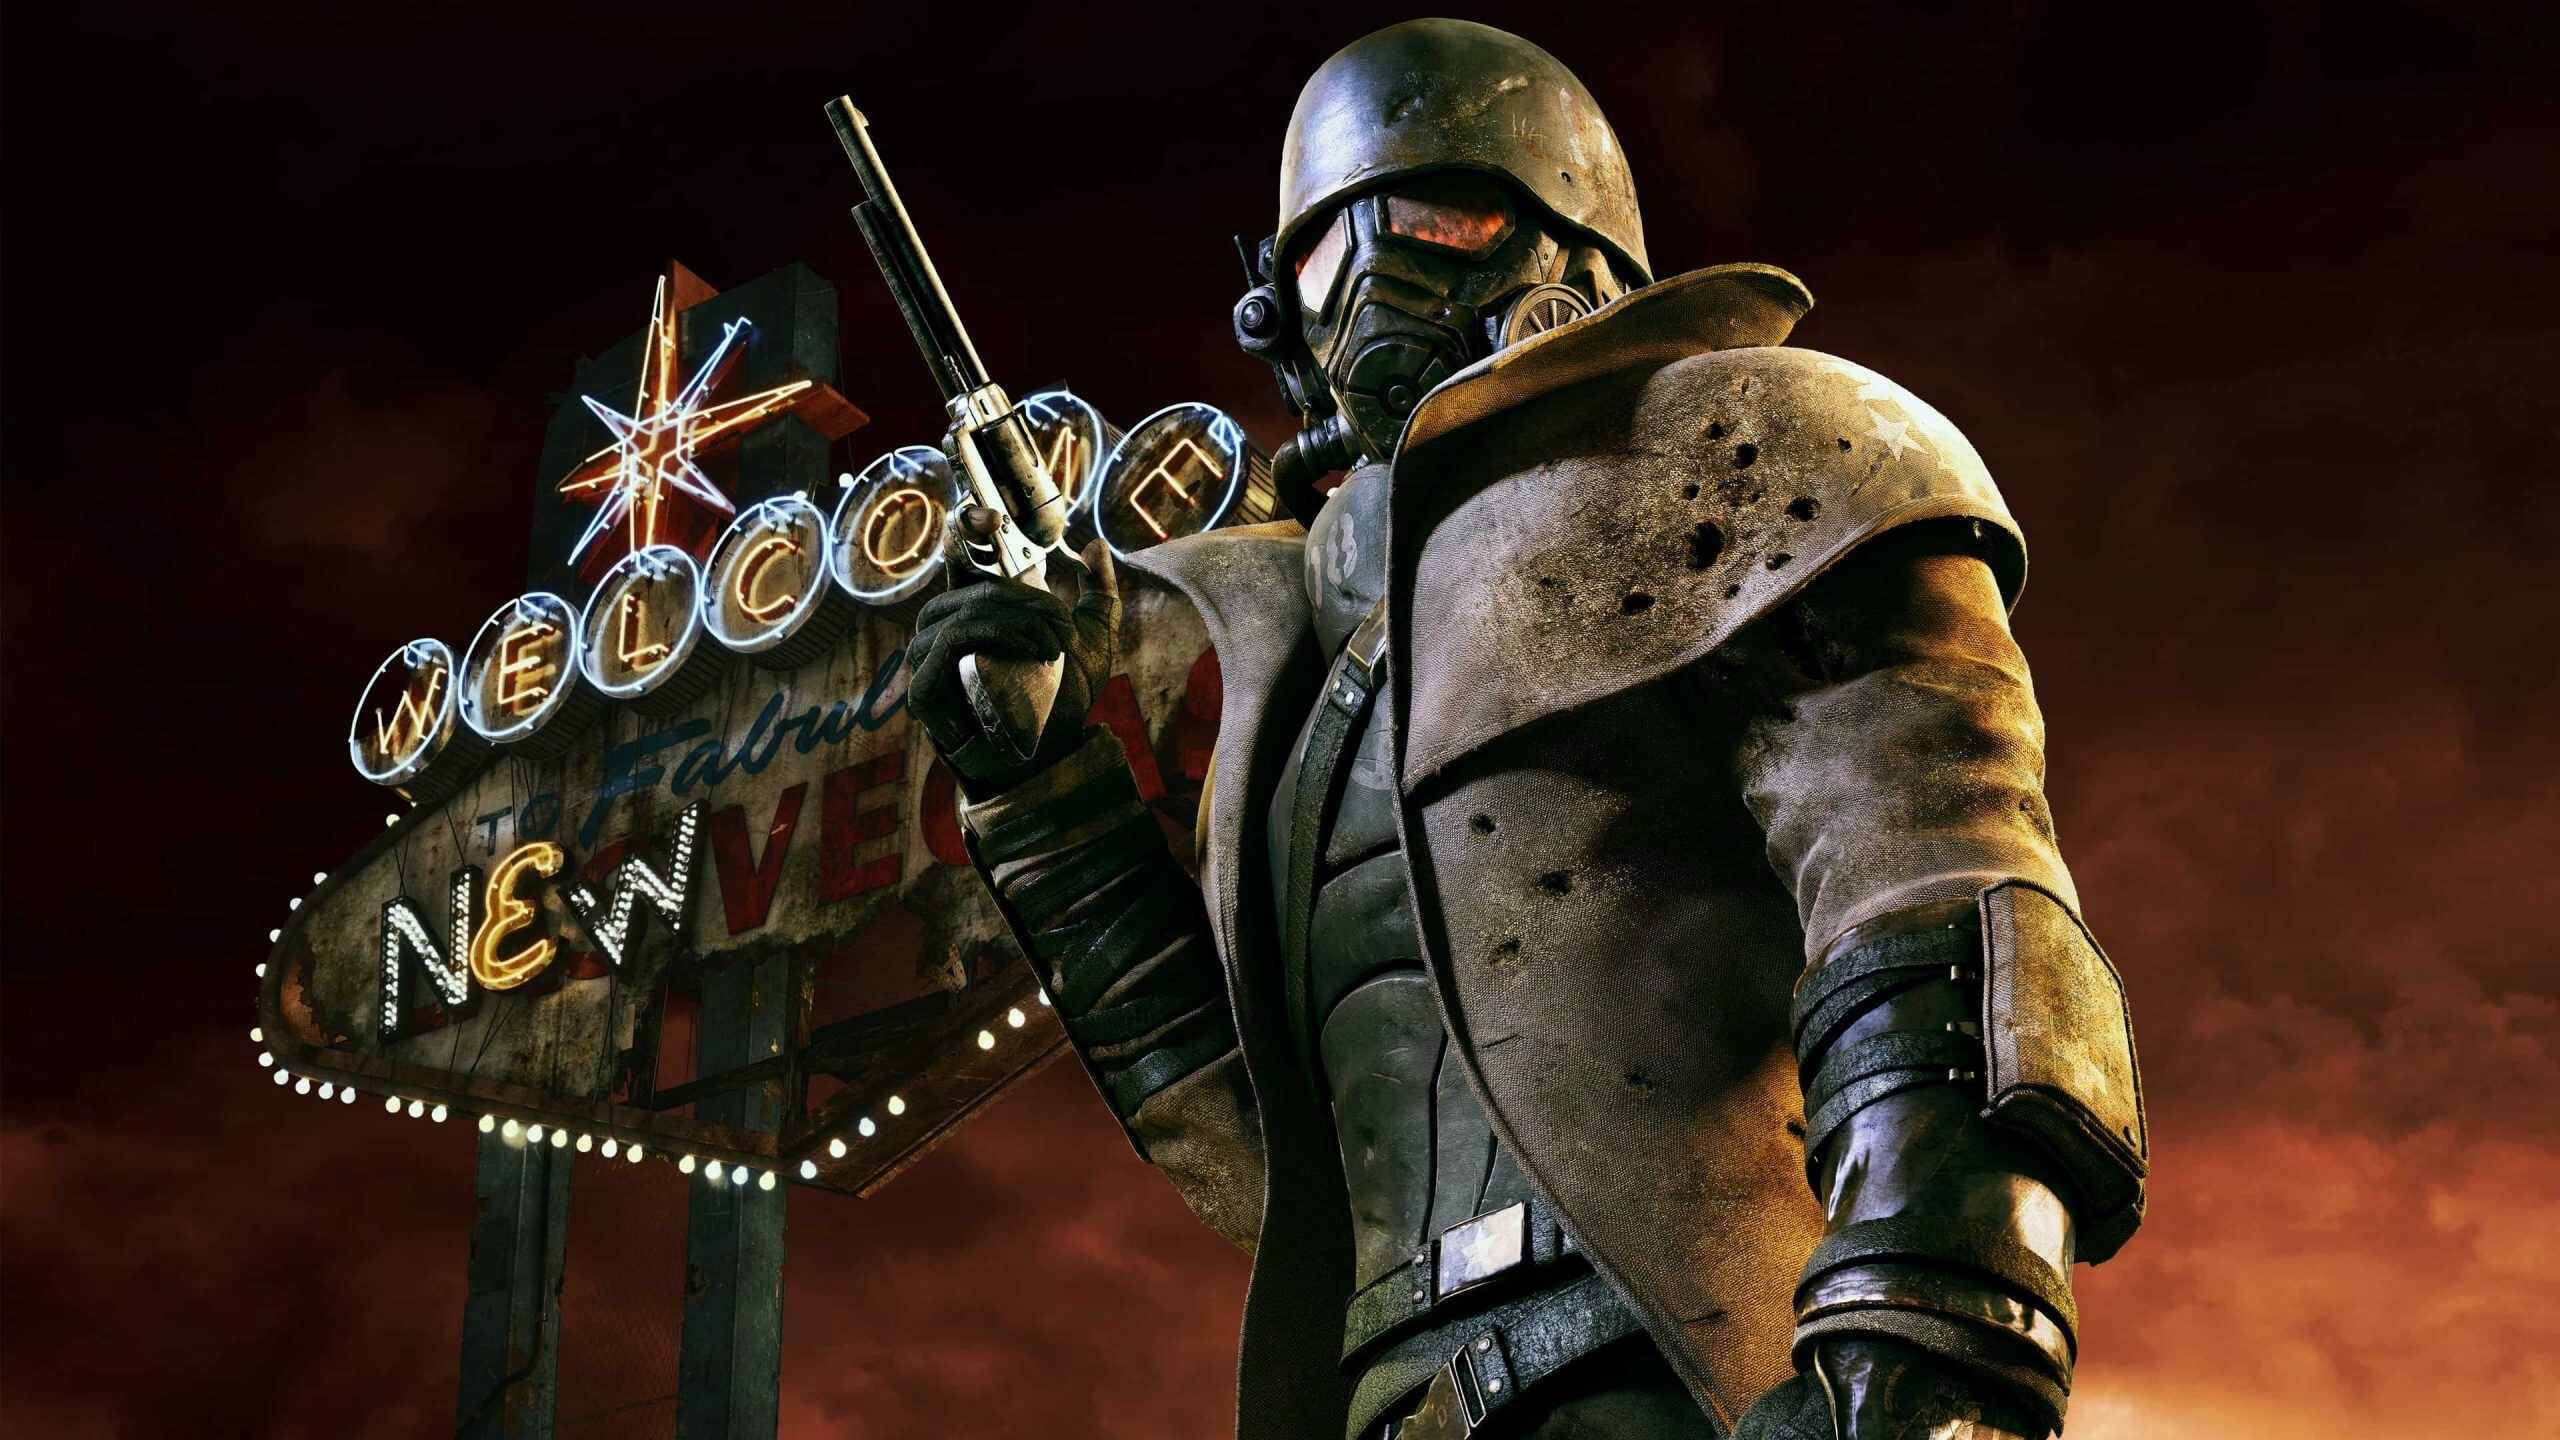 Fallout: New Vegas, A post-apocalyptic role-playing video game developed by Obsidian Entertainment. 2560x1440 HD Wallpaper.